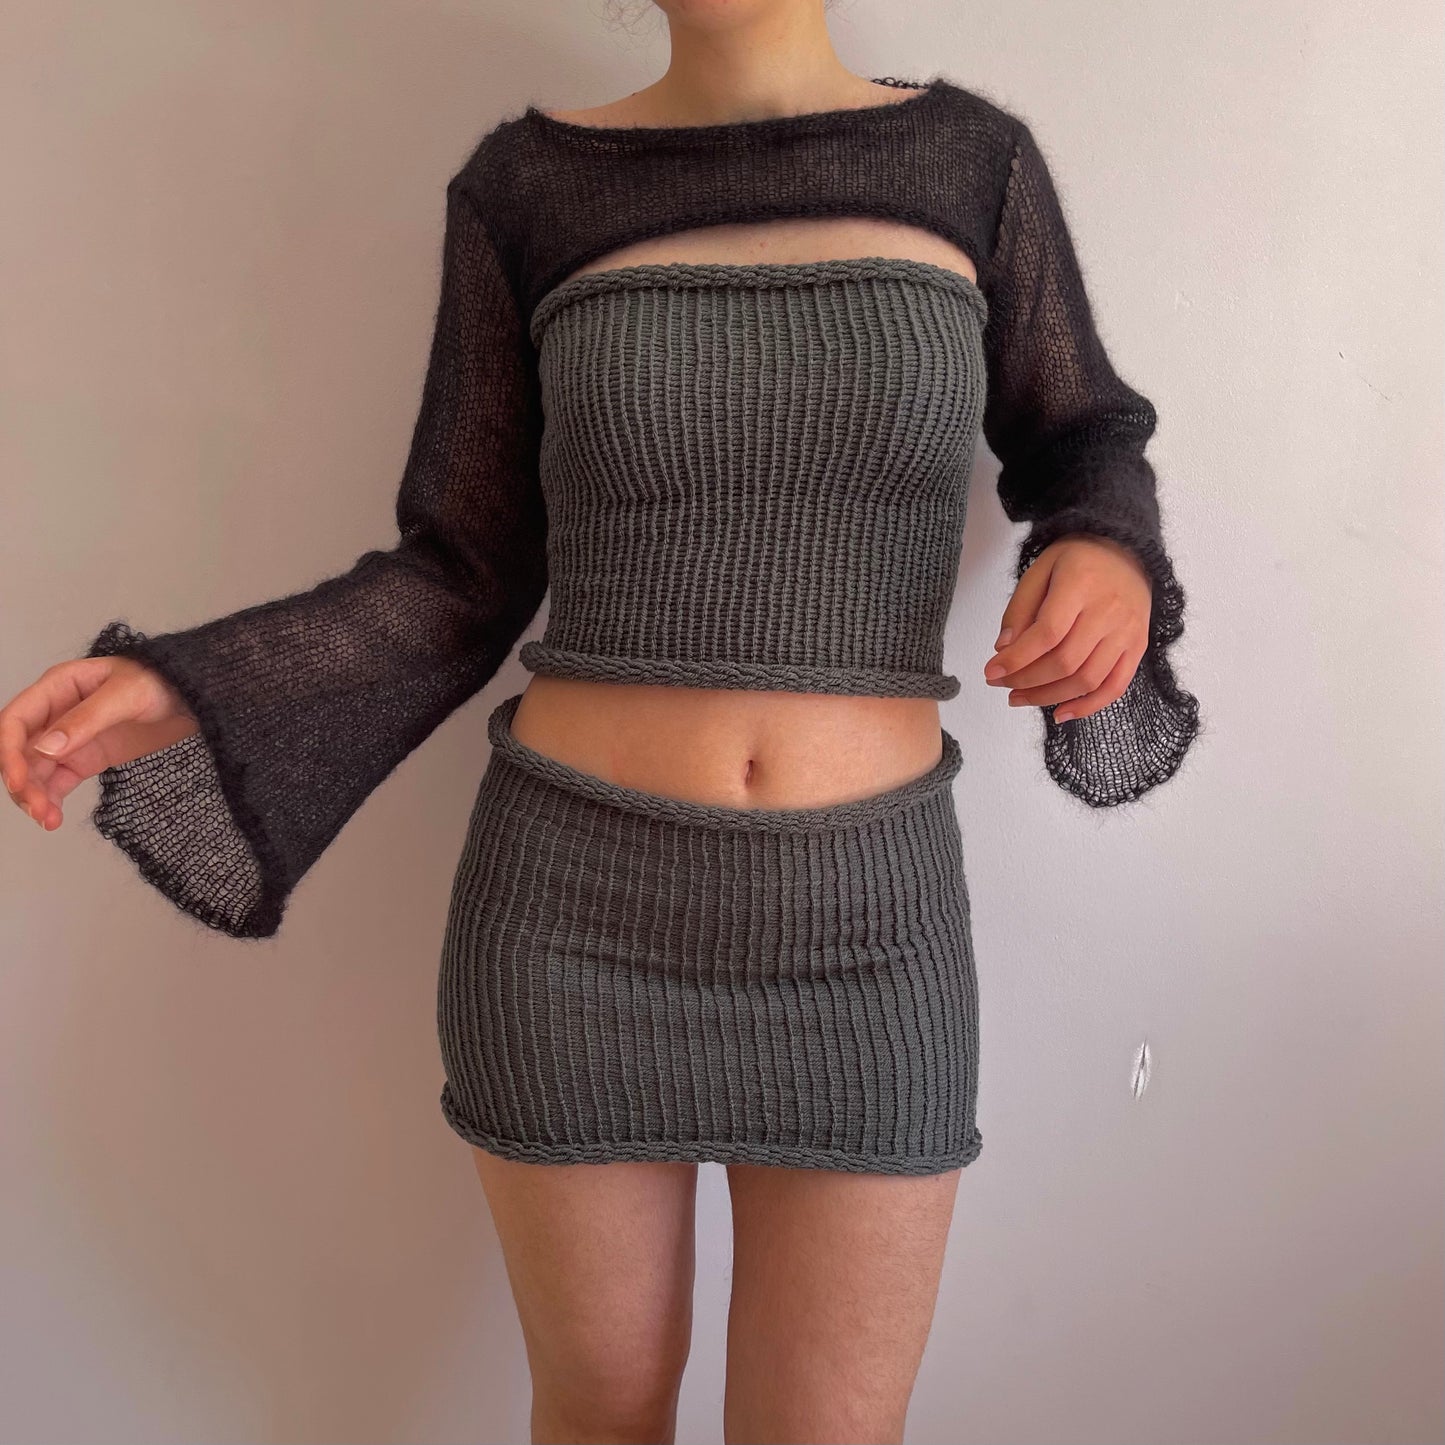 SET: Handmade knitted bandeau top and skirt in slate grey